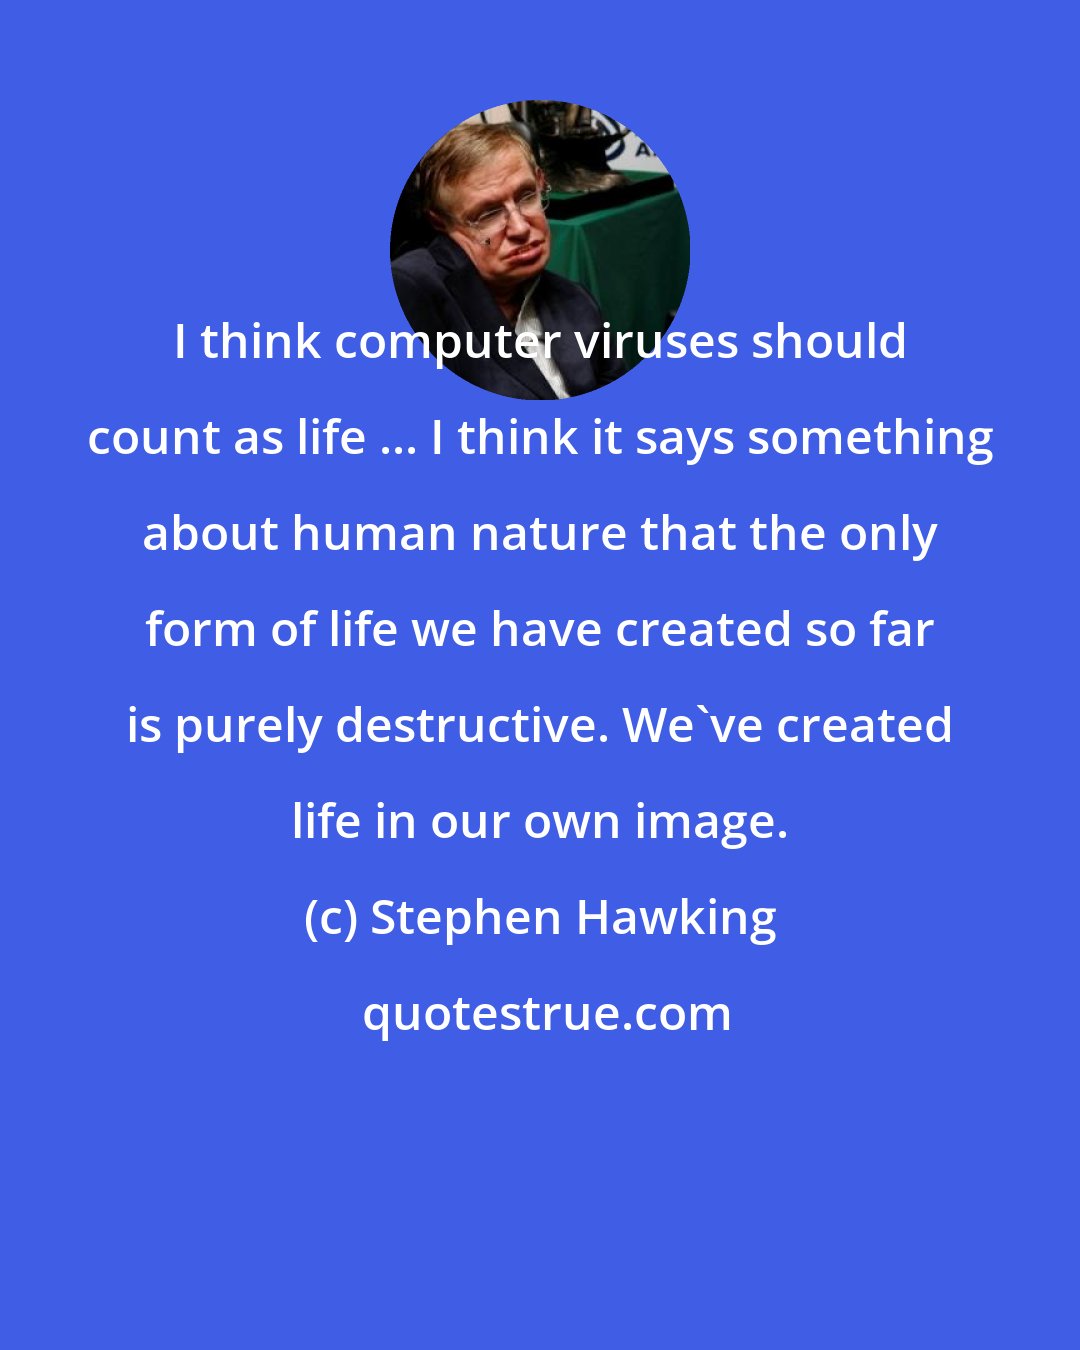 Stephen Hawking: I think computer viruses should count as life ... I think it says something about human nature that the only form of life we have created so far is purely destructive. We've created life in our own image.